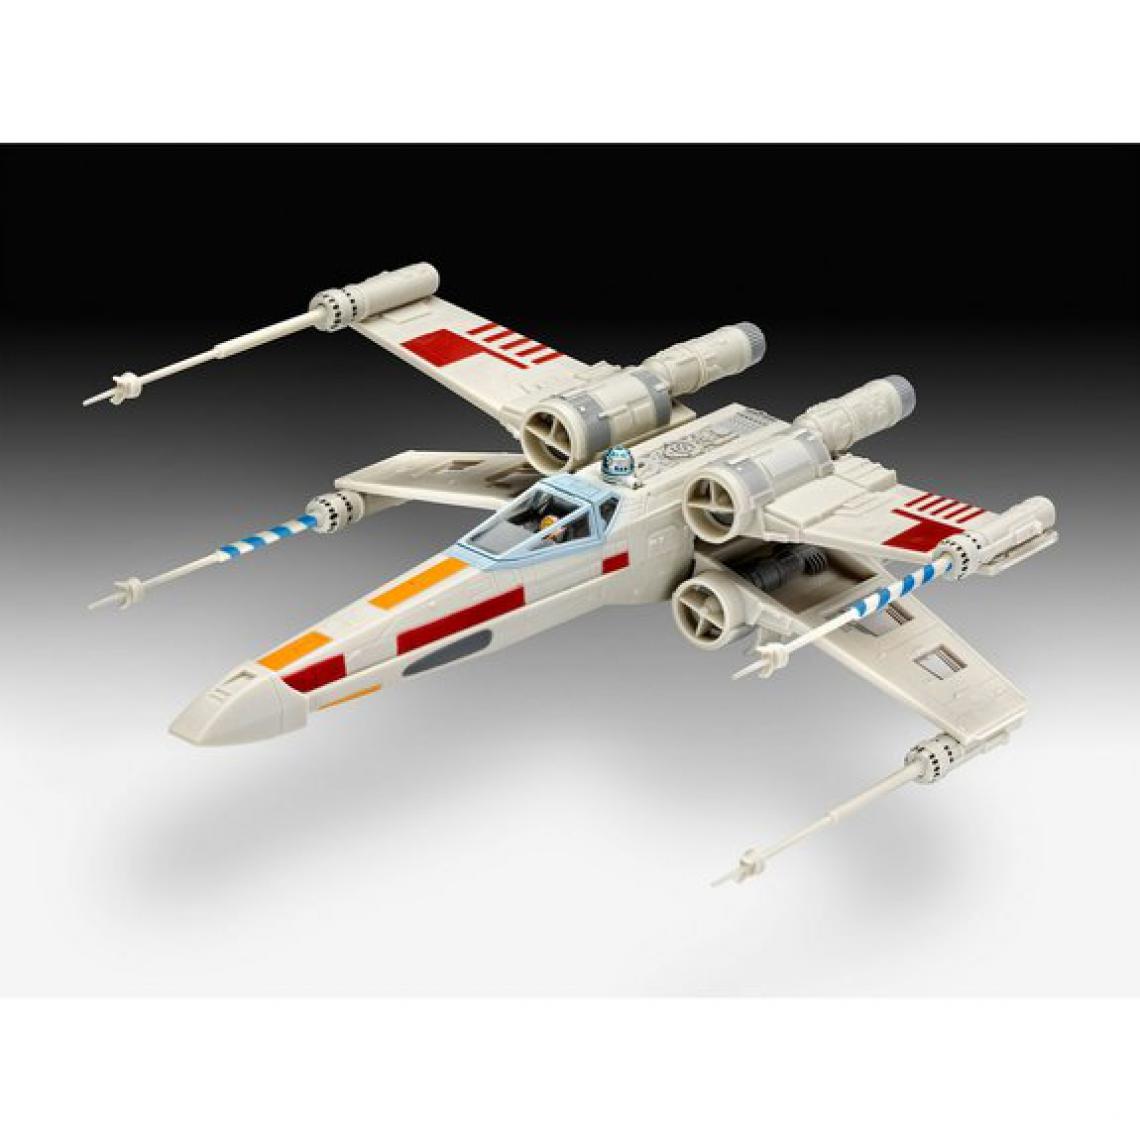 Ludendo - Maquette Revell Star Wars Revell X-Wing et TIE Fighter - Voitures